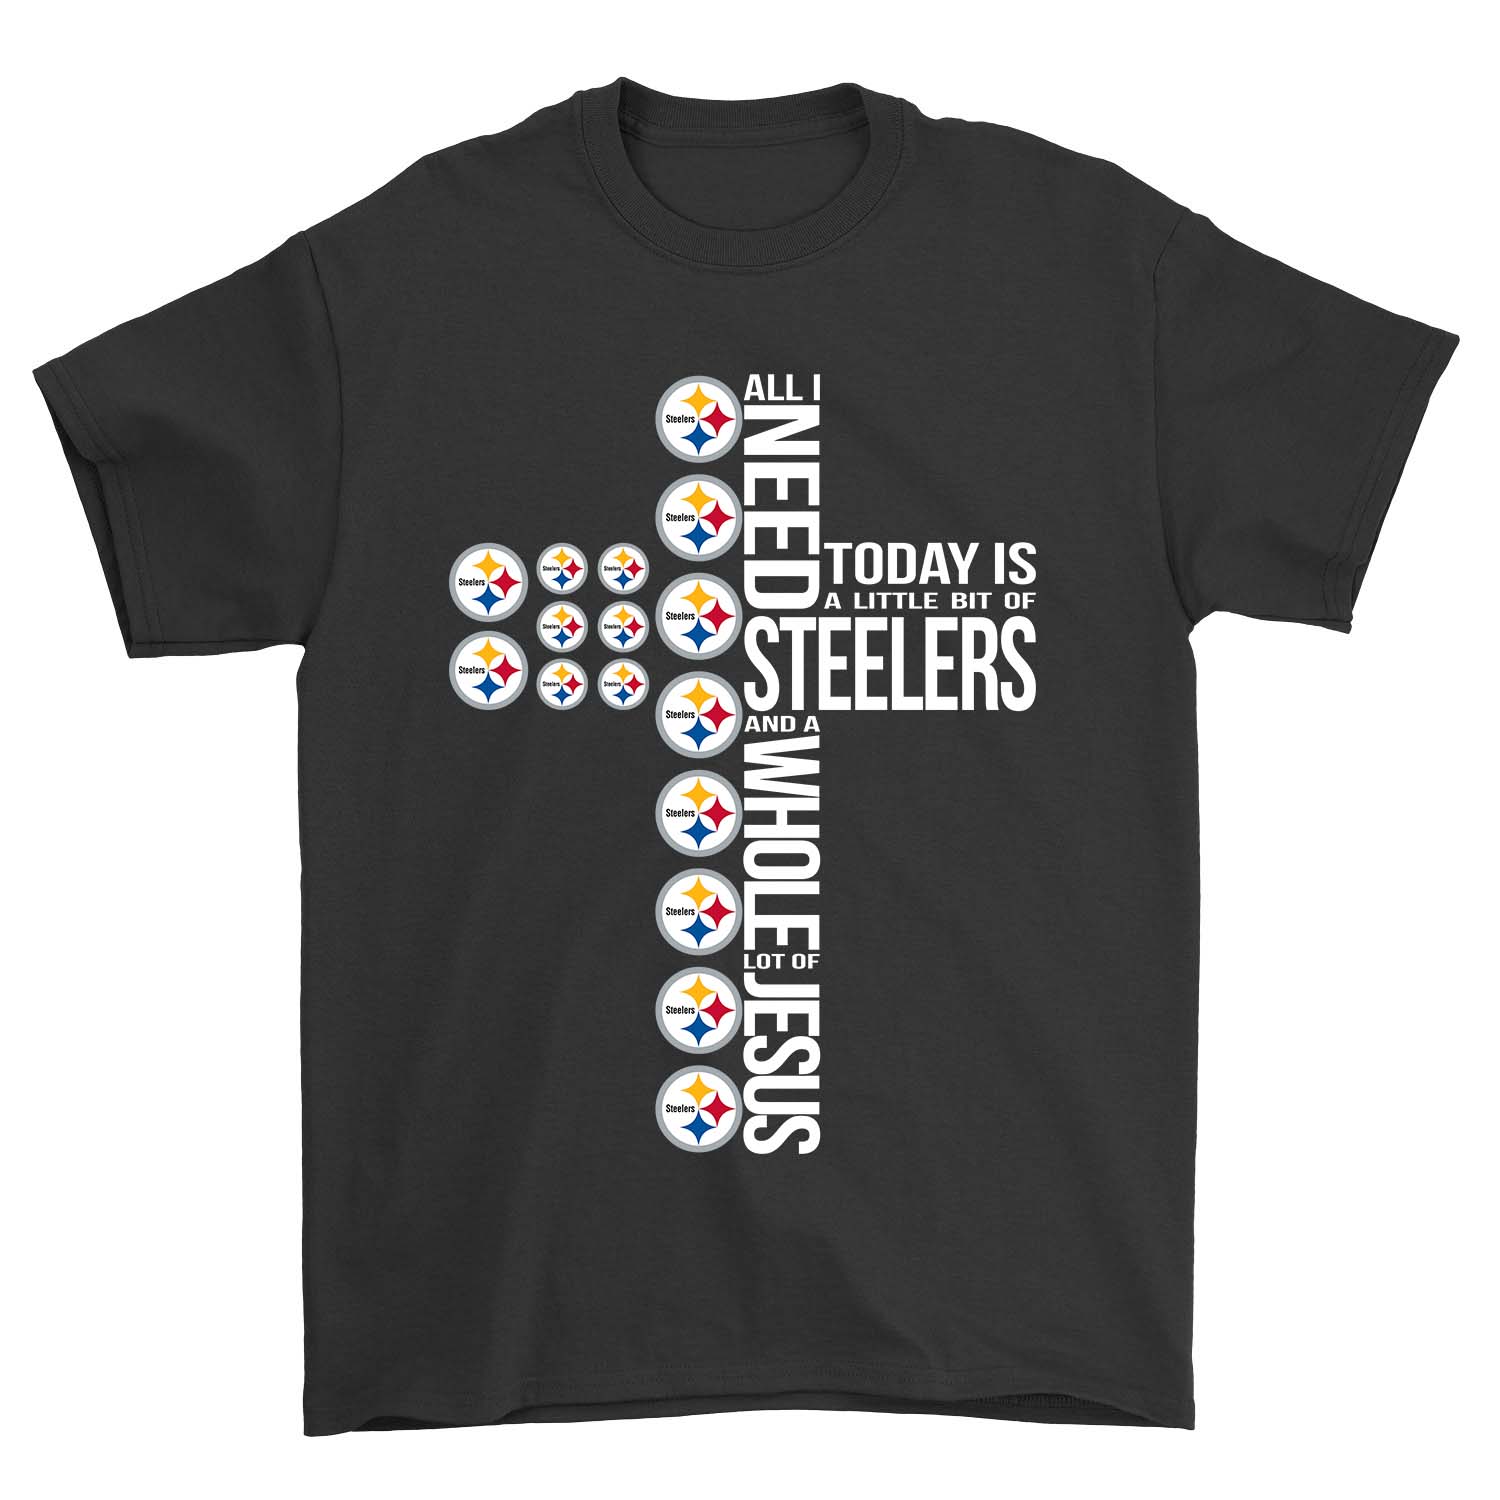 NFL Pittsburgh Steelers All I Need To Day Is A Little Bit Of Steelers And A Whole Lot Of Jesus Long Sleeve Shirt Size Up To 5xl